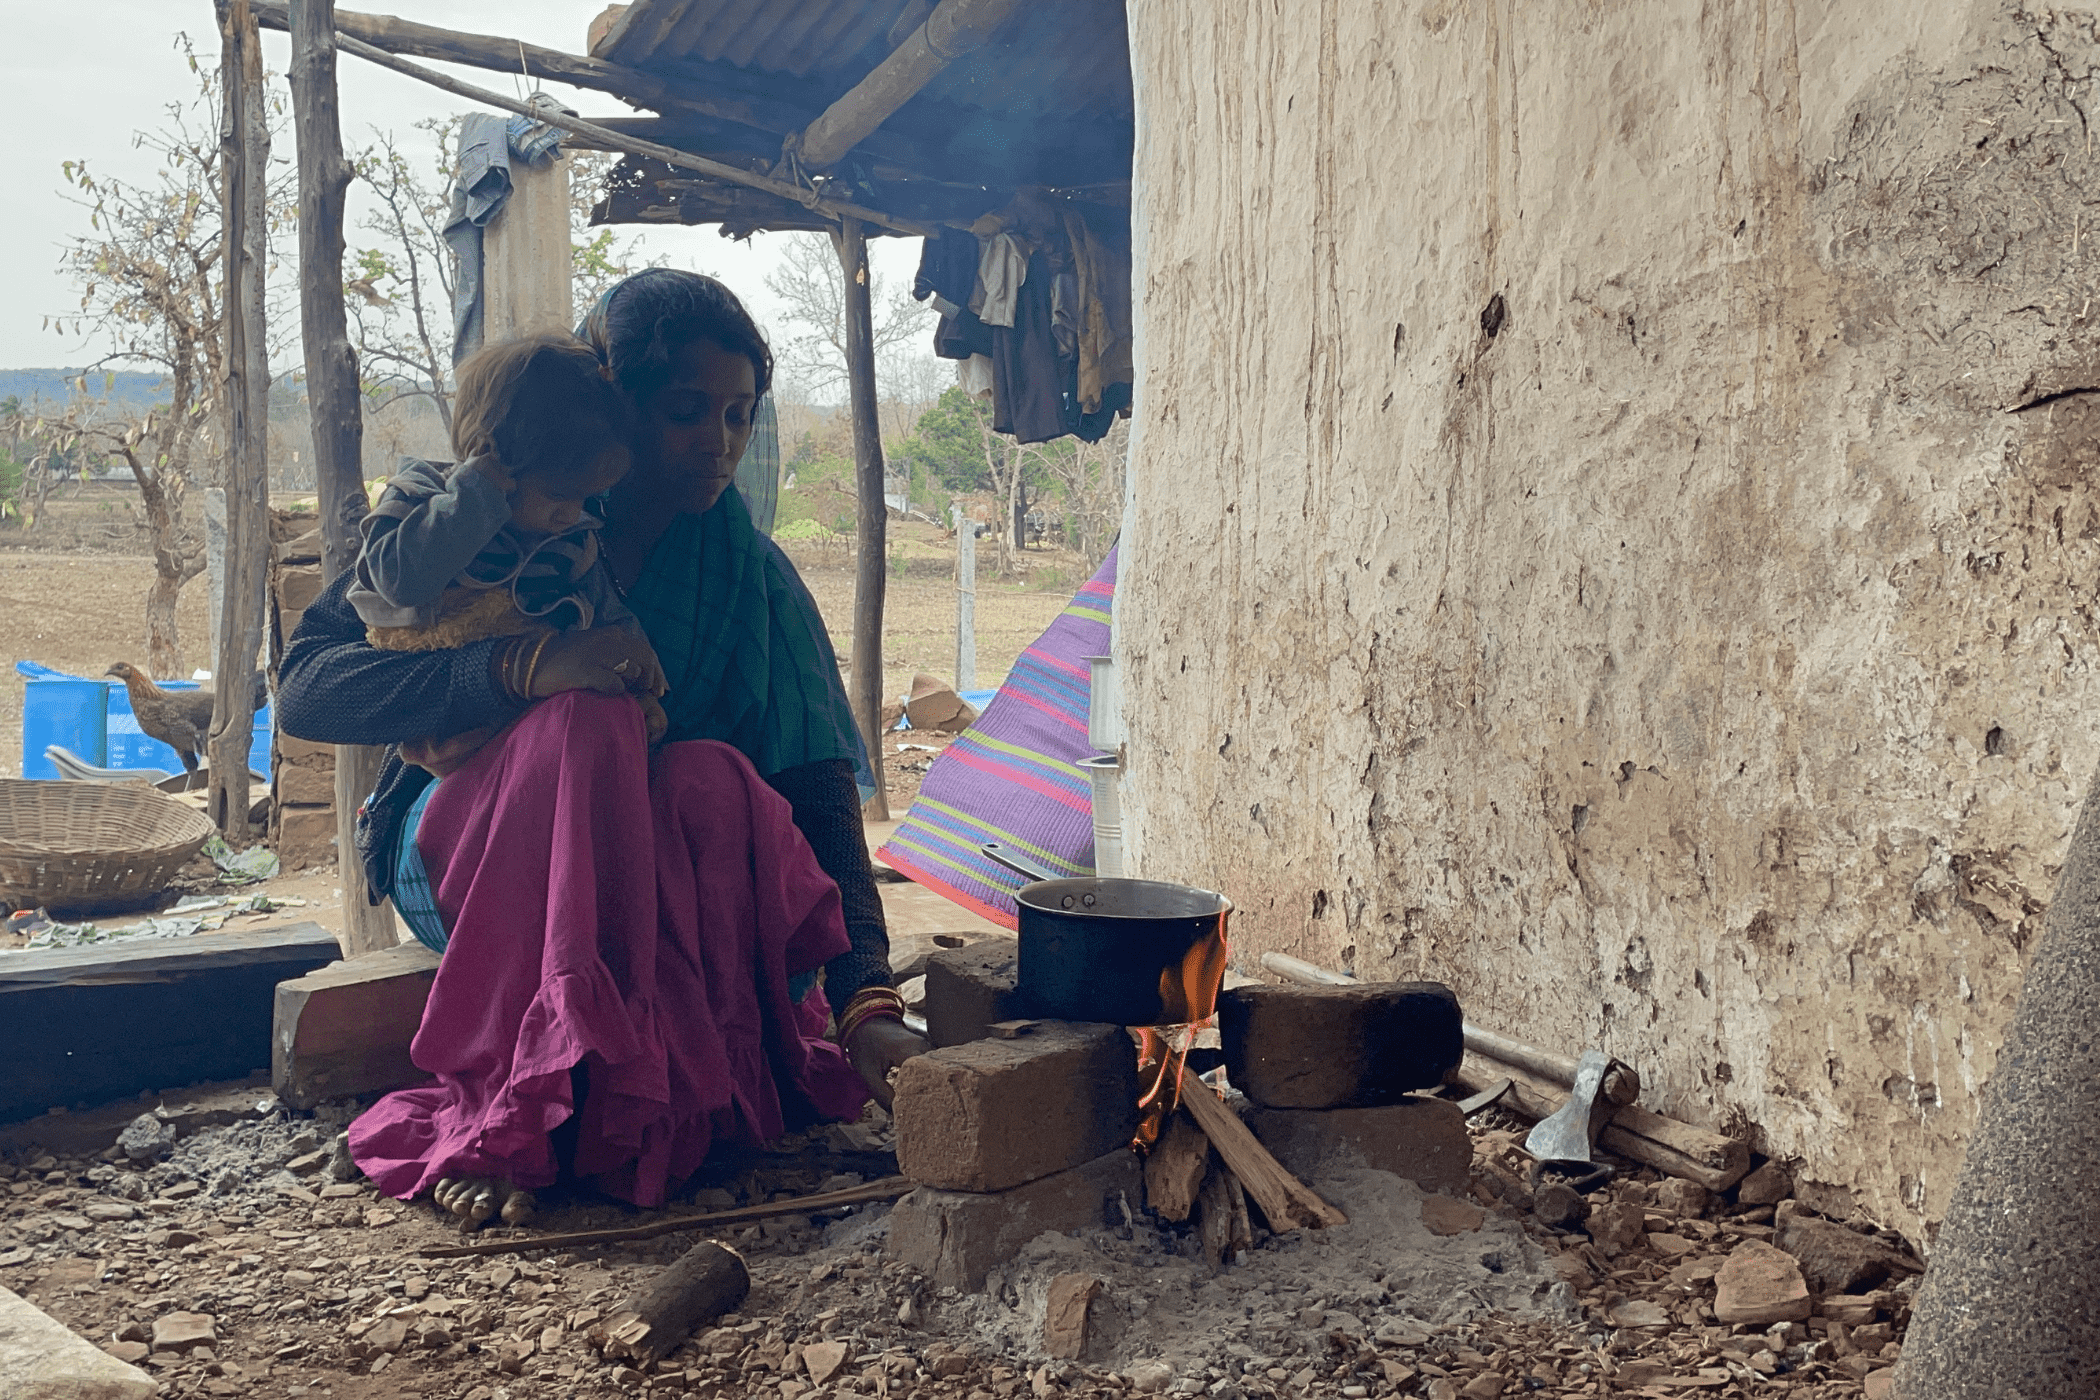 A woman, wearing a pink sari, holds a child in her arms as she adds firewood to the fire that is heating a blackened pot